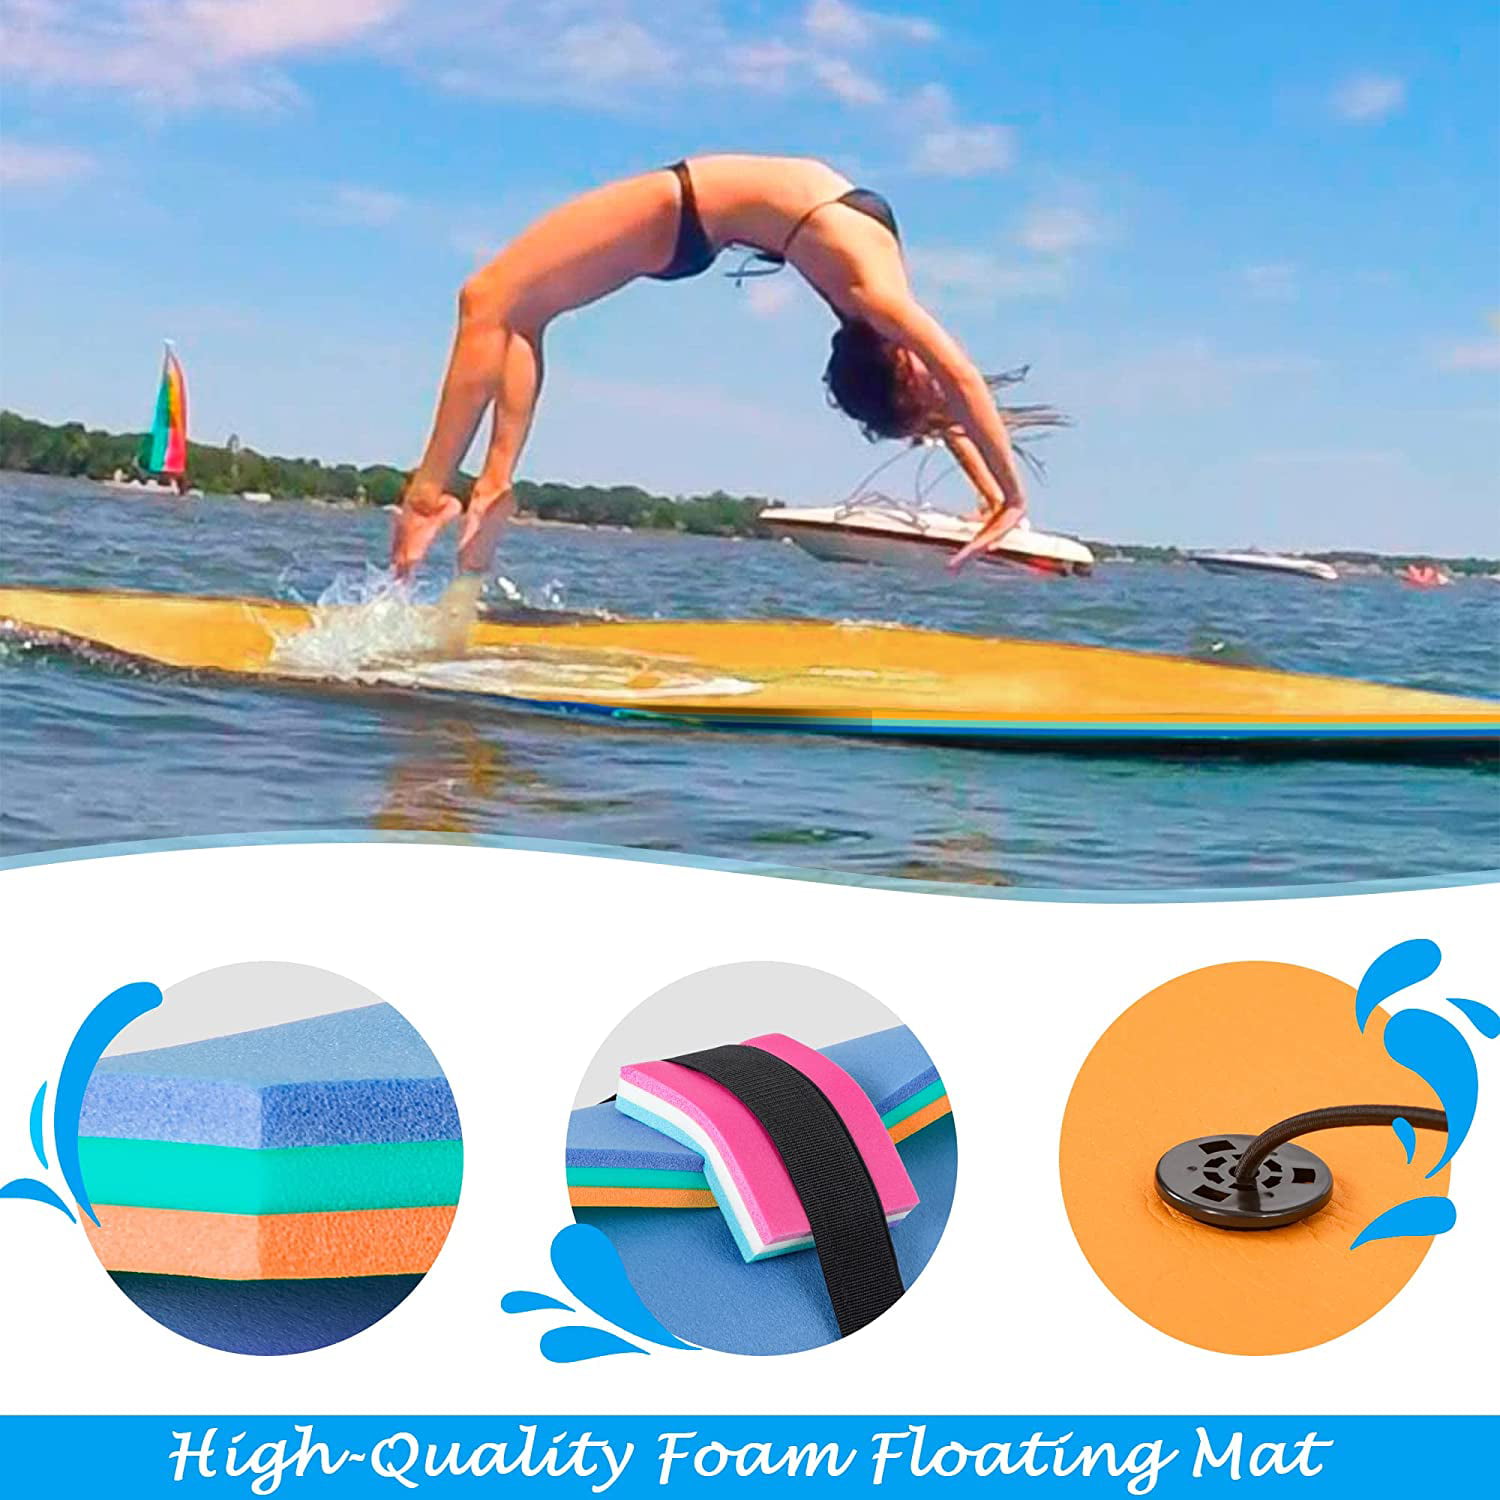 Floating Water Mats